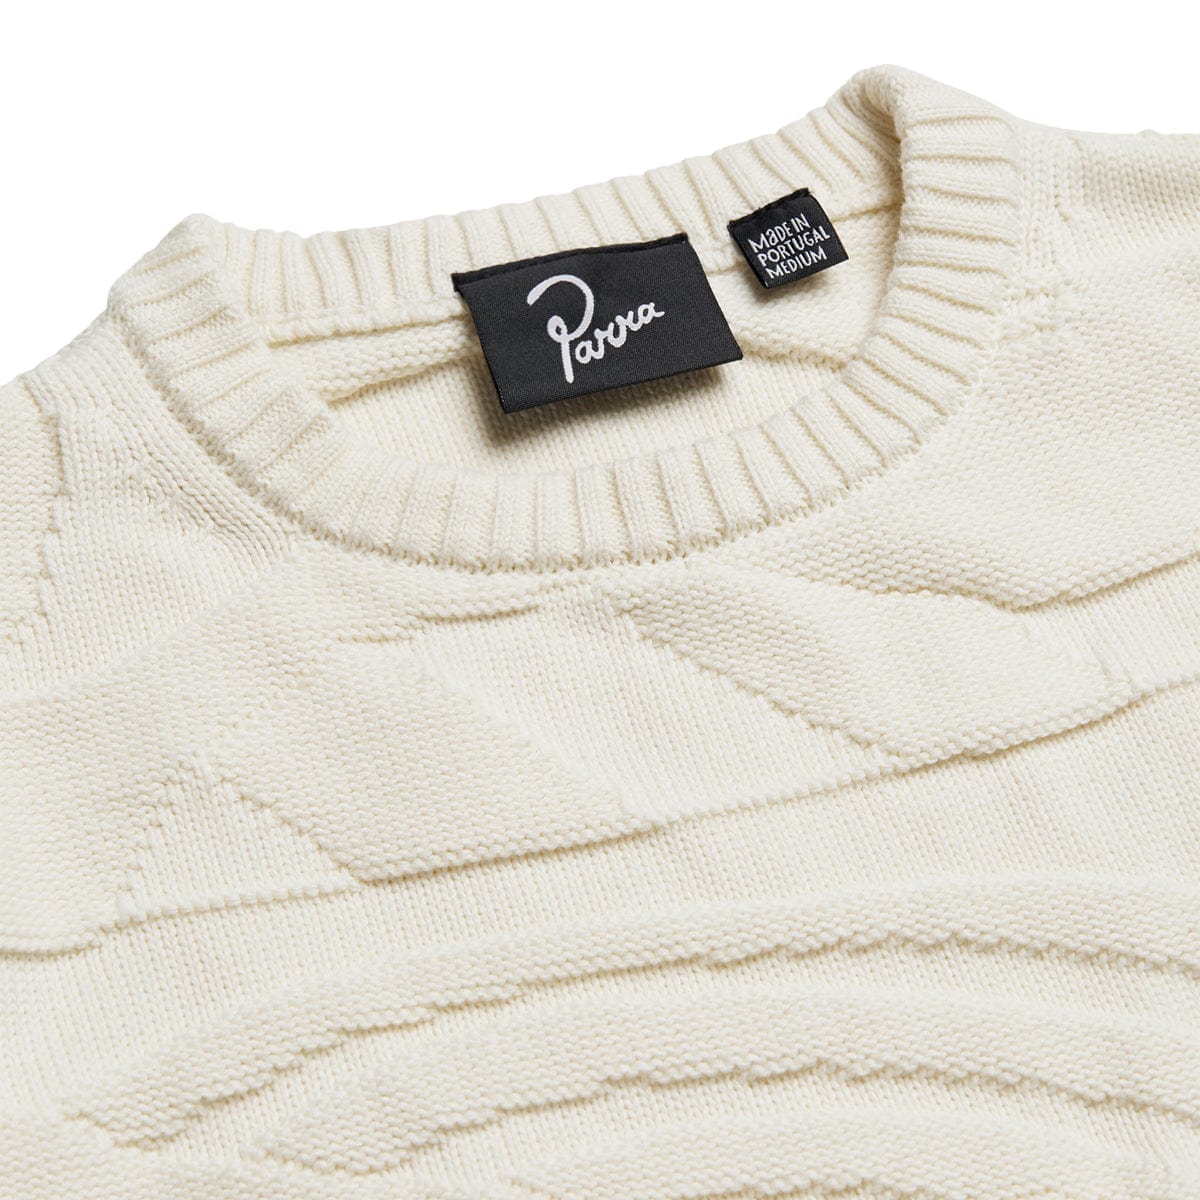 By Parra Knitwear LANDSCAPED KNITTED PULLOVER